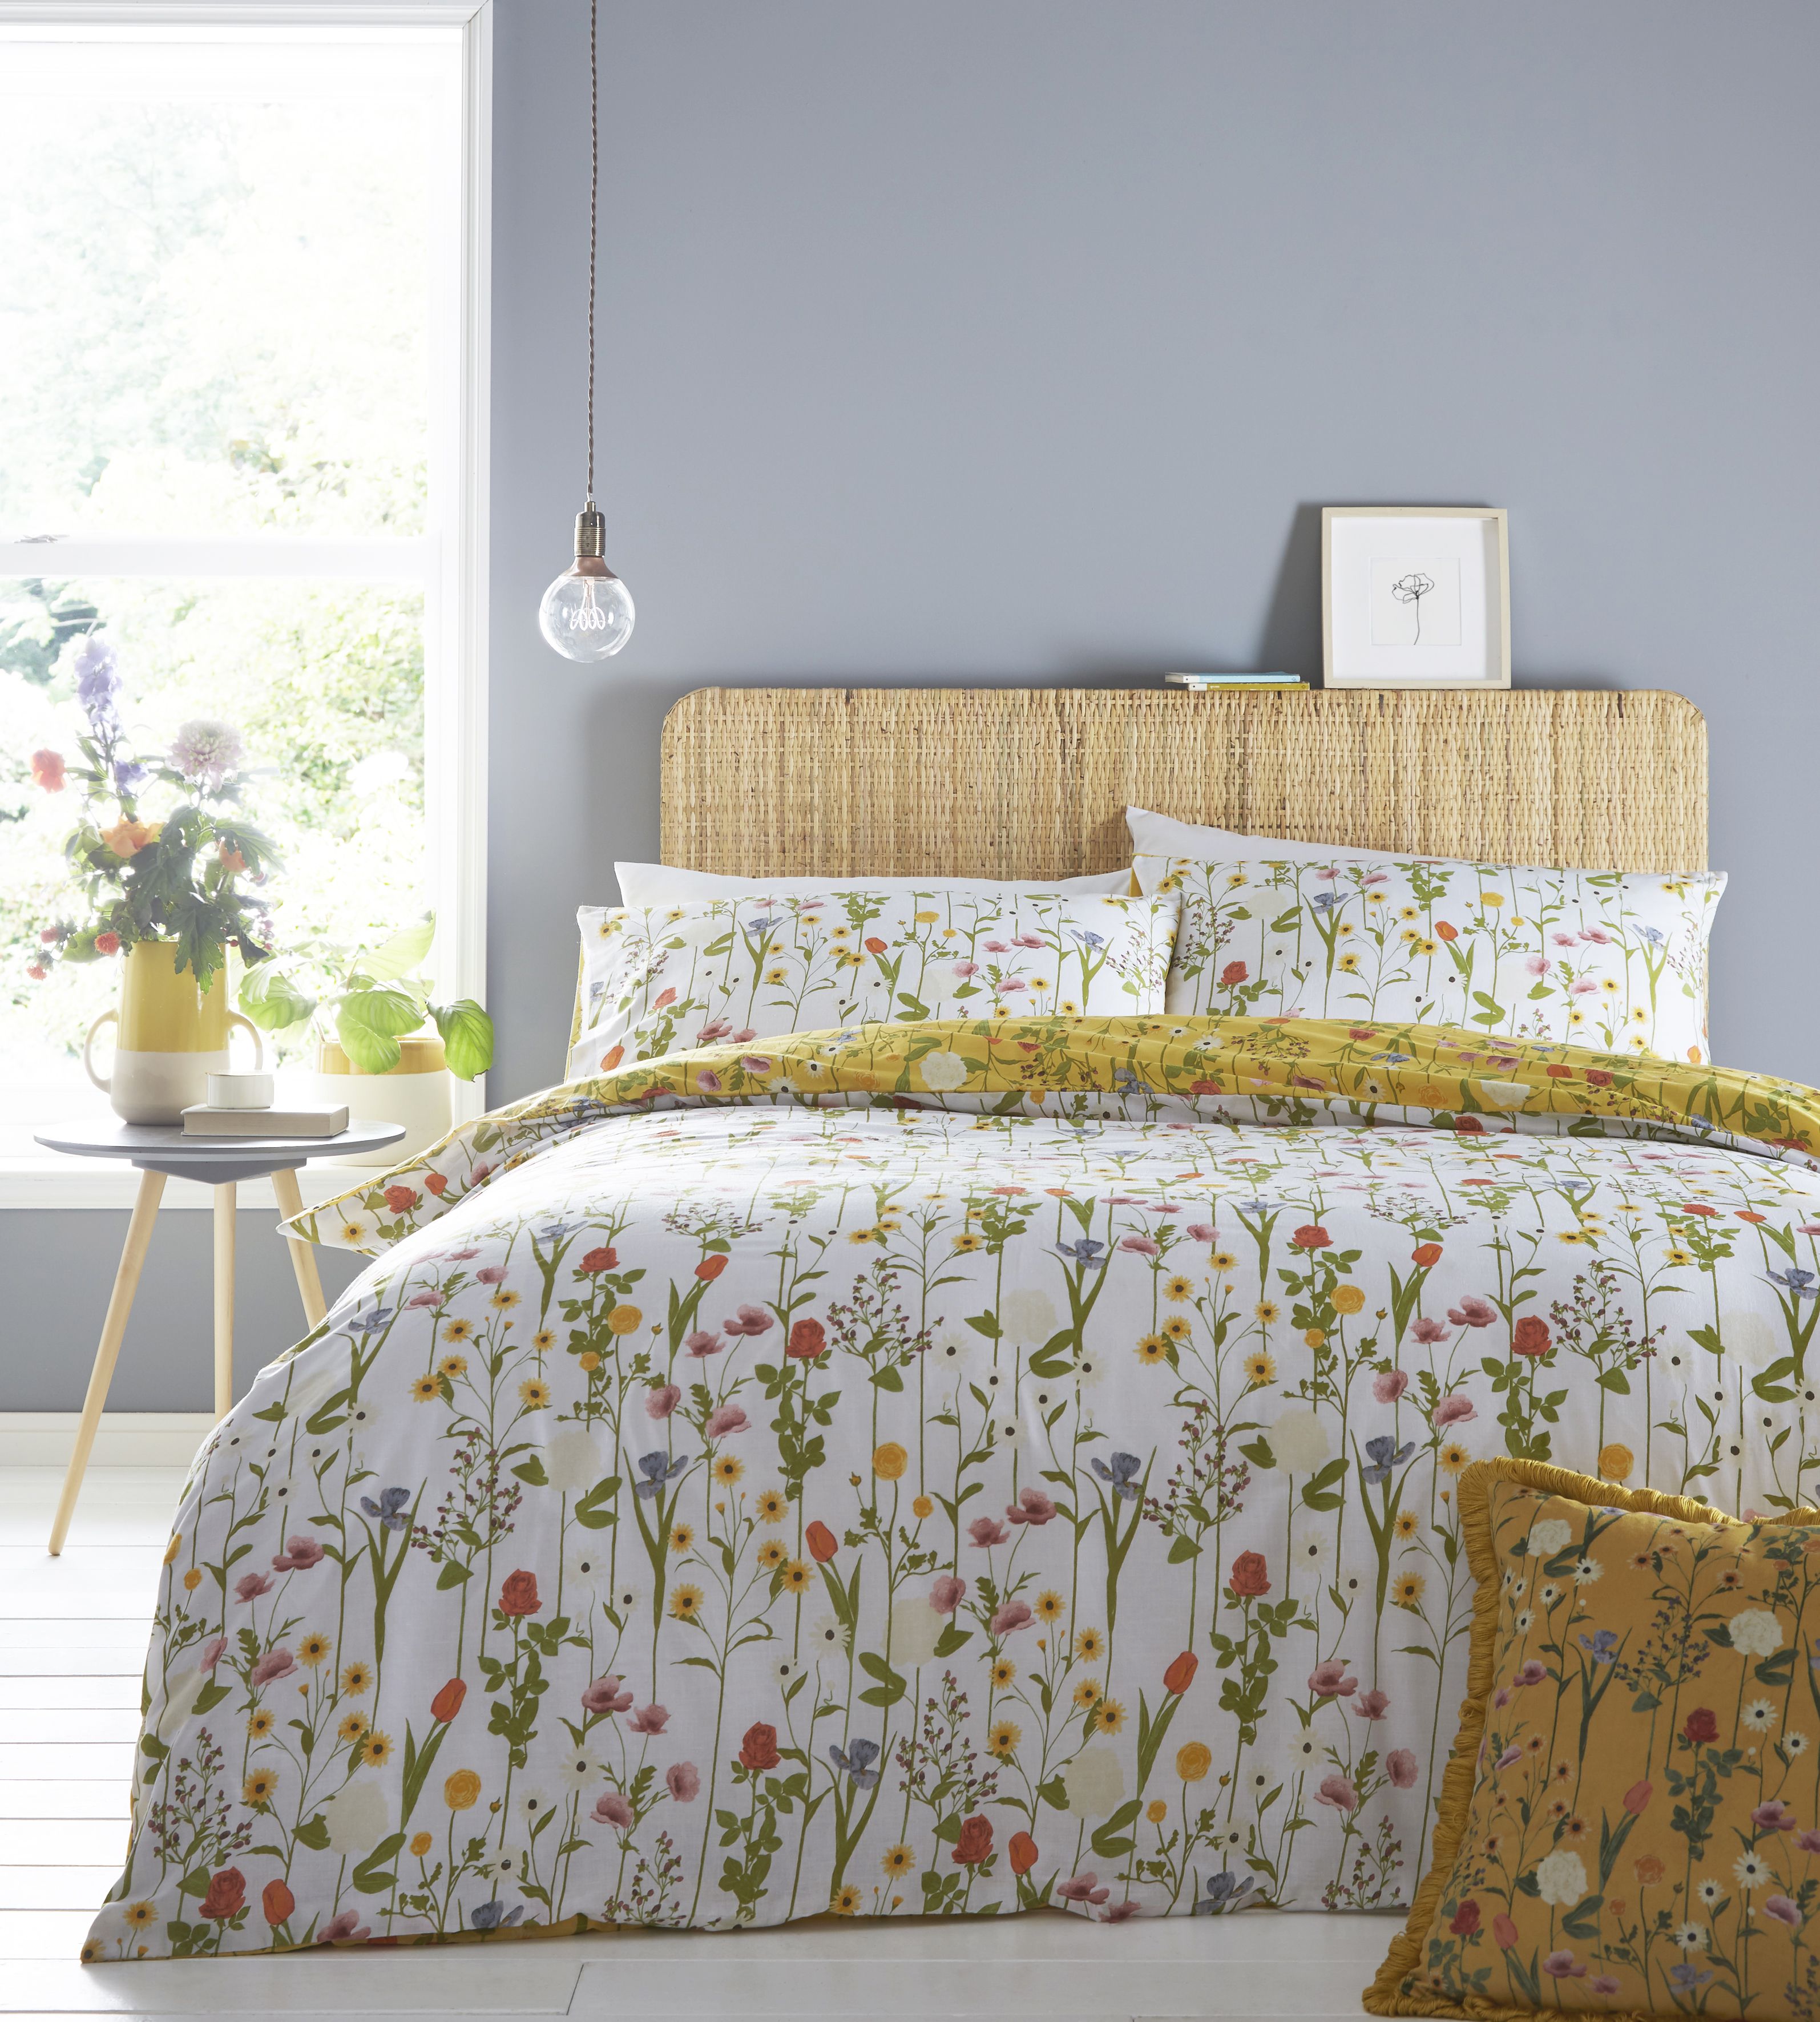 A beautiful and bold hand-painted botanical print, Fleura features delicate stems of soft petalled flowers creating a covering of colour. The flowers are also splashed over the reverse against a white base, for a more subtle and gentle look.